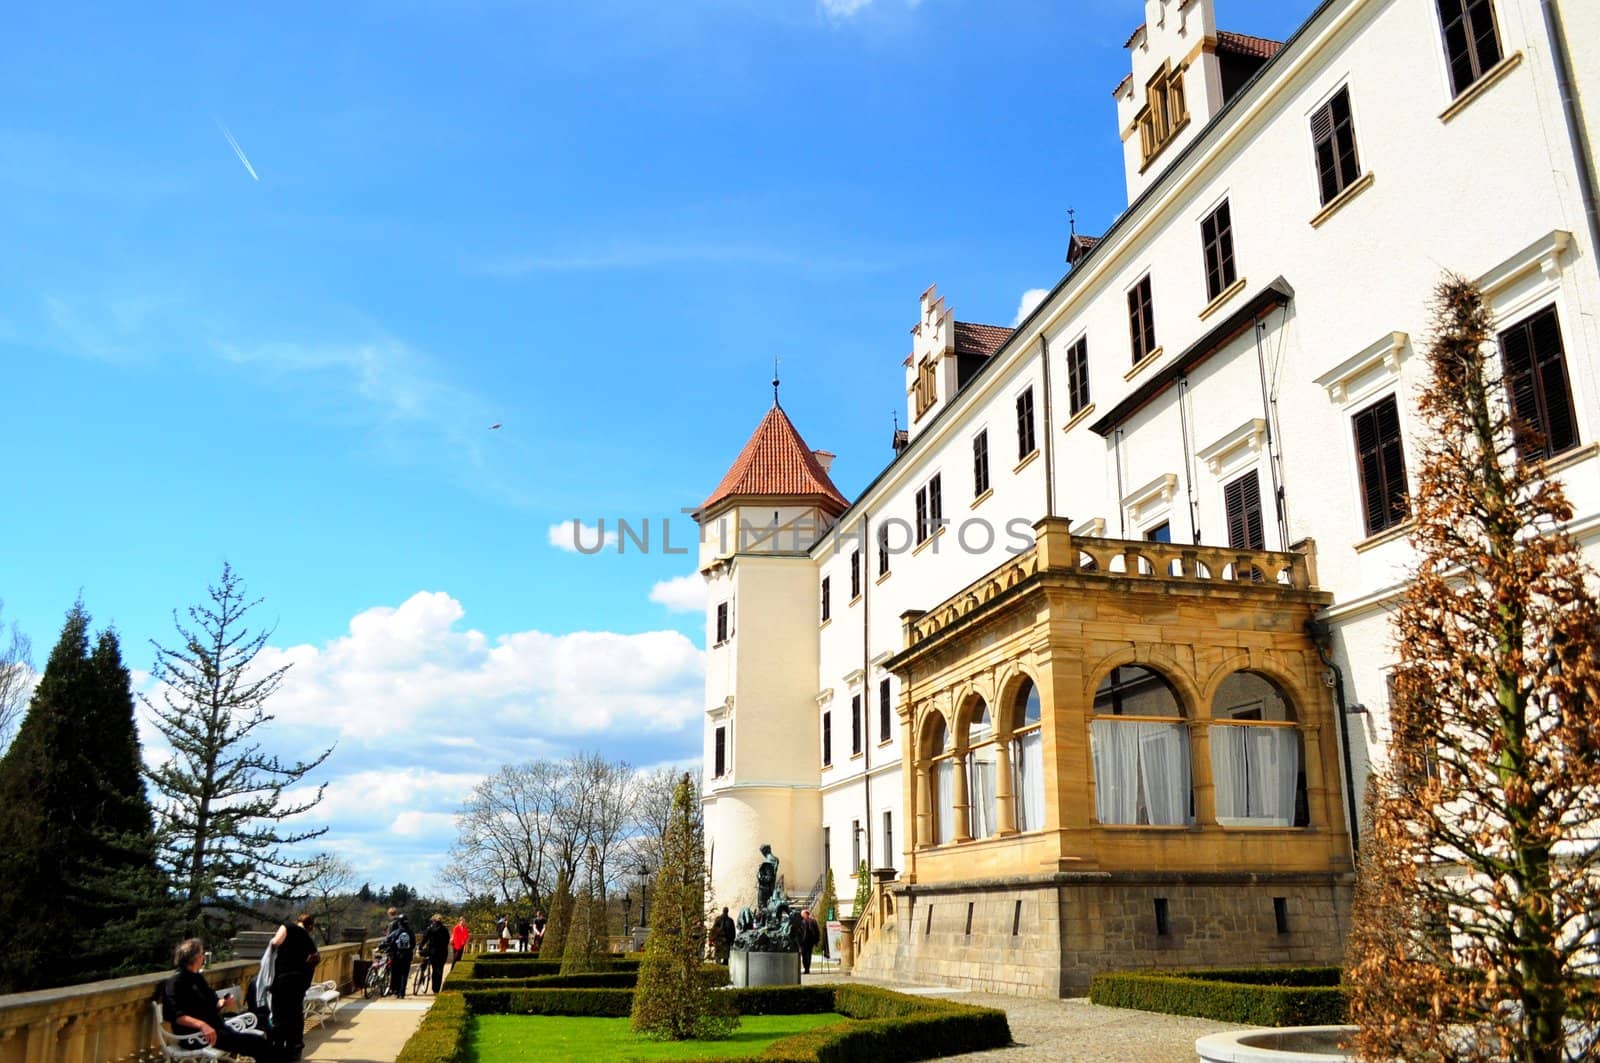 Panorama of the Konopiste Castle over blue sky during the spring day